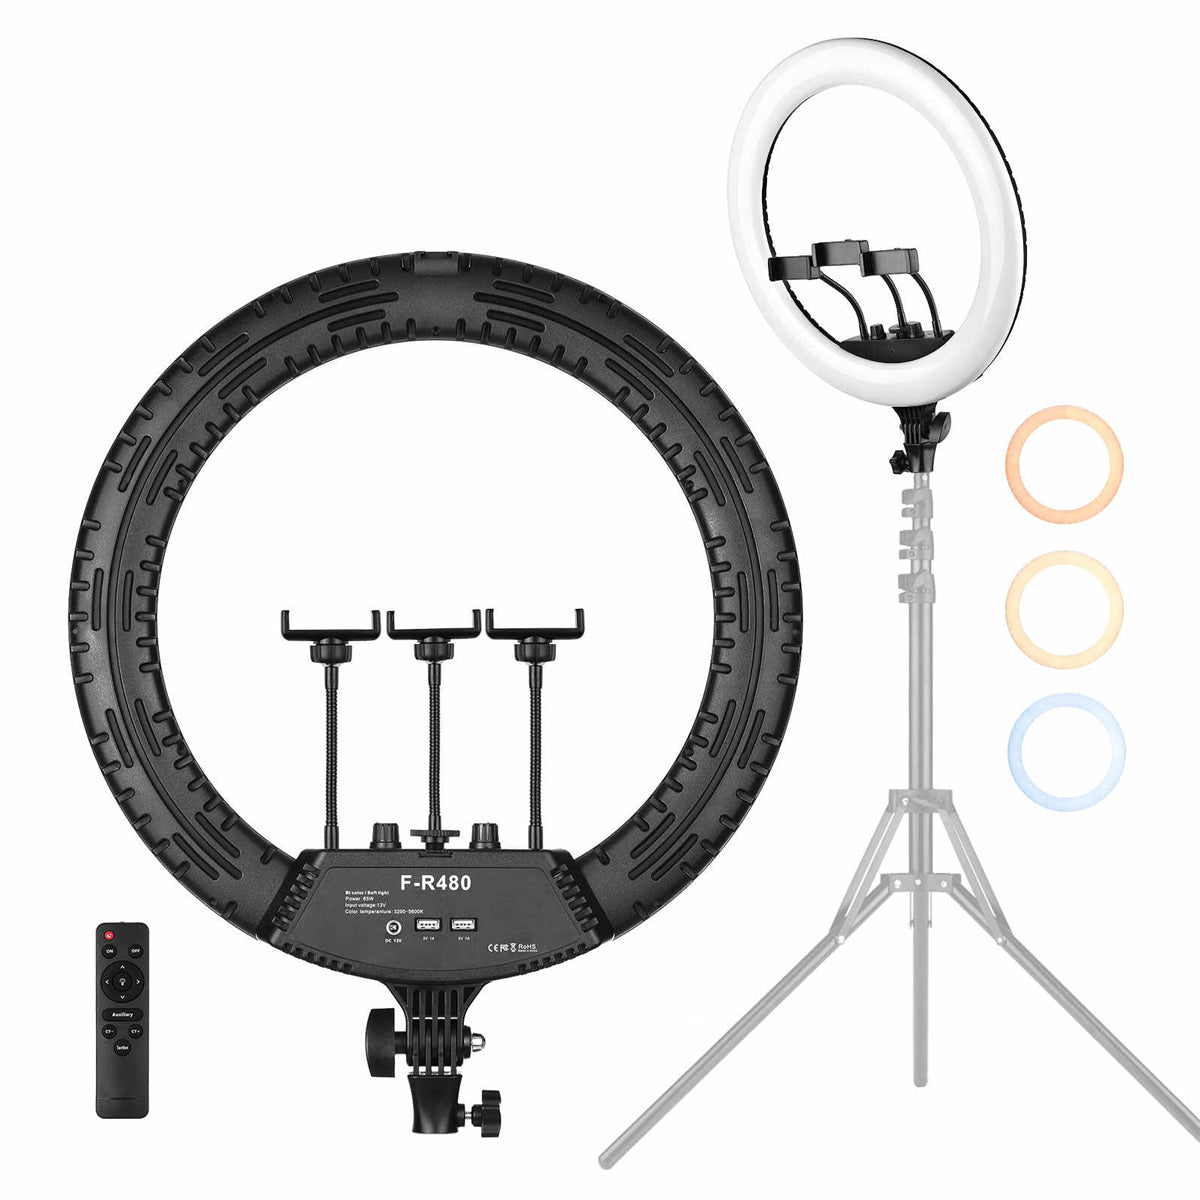 RINGO - CGC 18 Inch LED Professional Ring Light With 5 Phone Holders